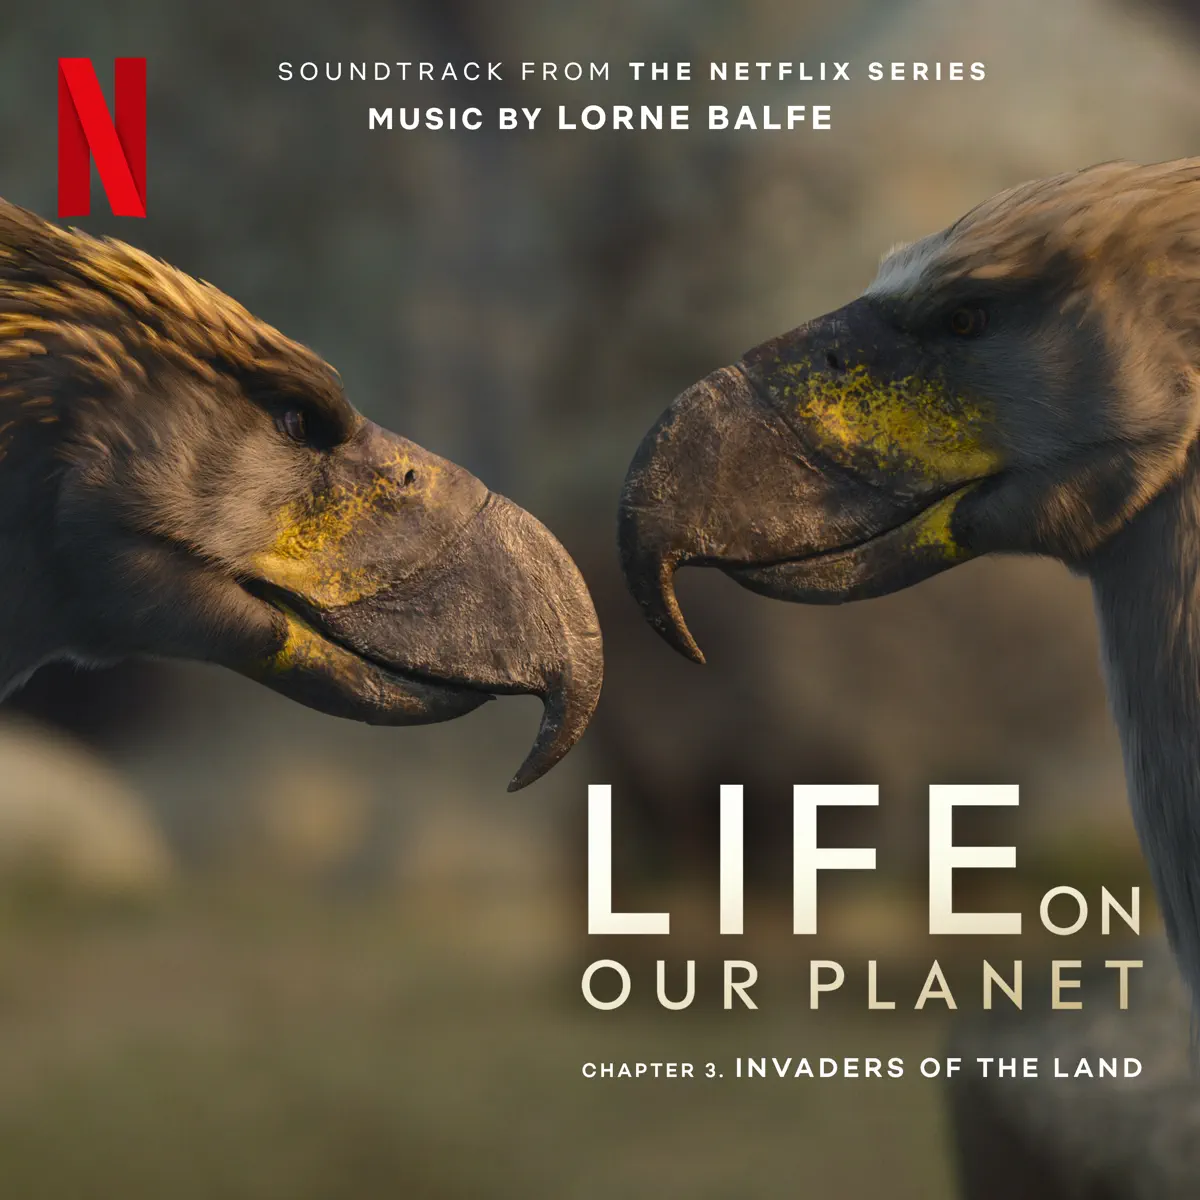 Lorne Balfe - 地球萬物軌跡 Invaders of the Land: Chapter 3 (Soundtrack from the Netflix Series "Life on Our Planet") (2023) [iTunes Plus AAC M4A]-新房子